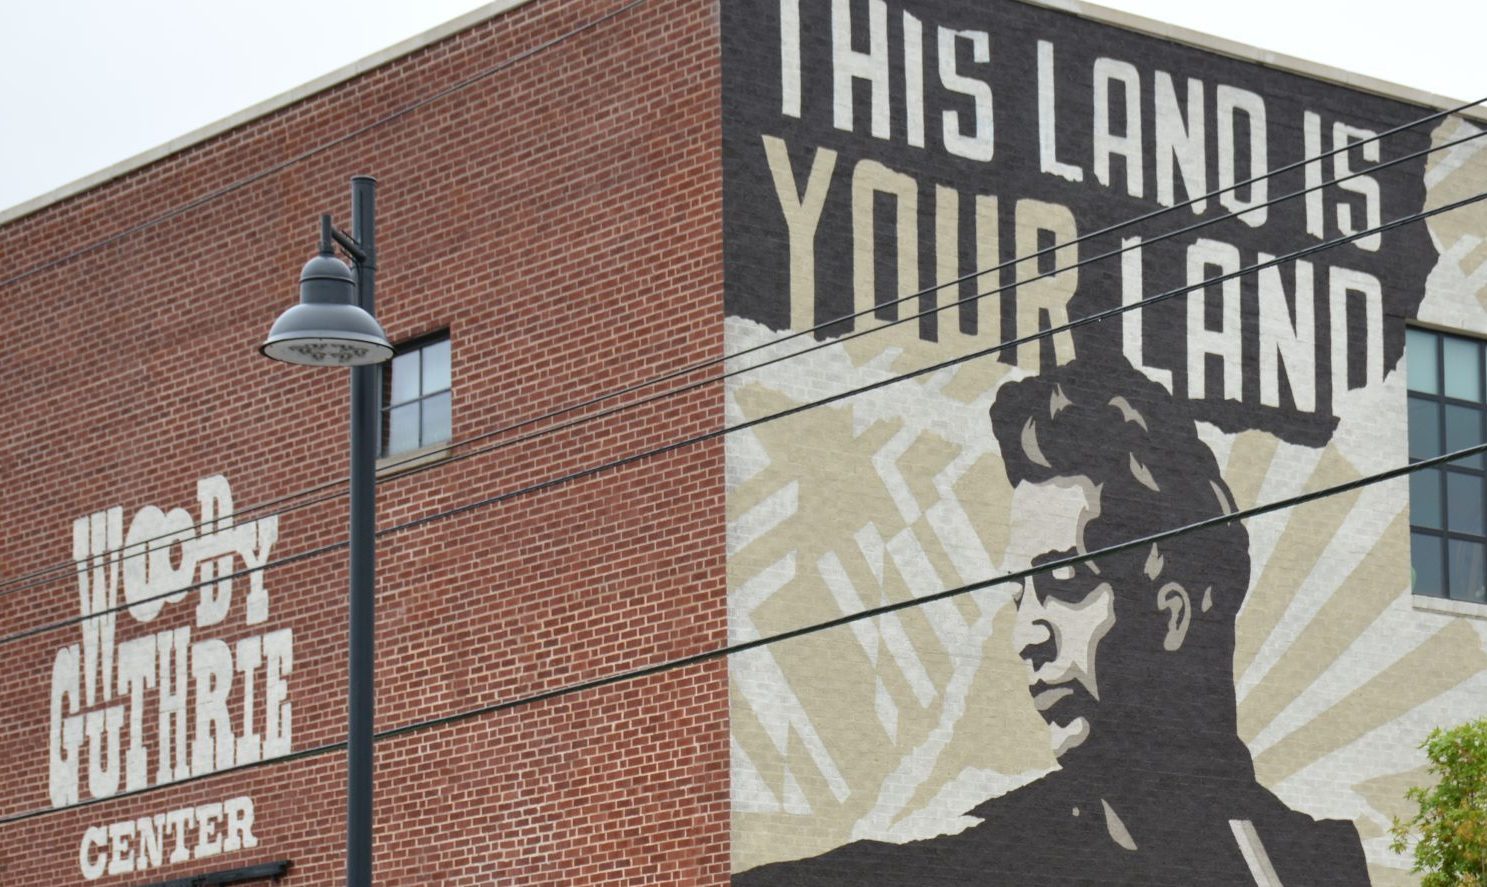 A mural of folk musician Woody Guthrie featuring an image of Guthrie playing guitar, below the text "The Land is Your Land".